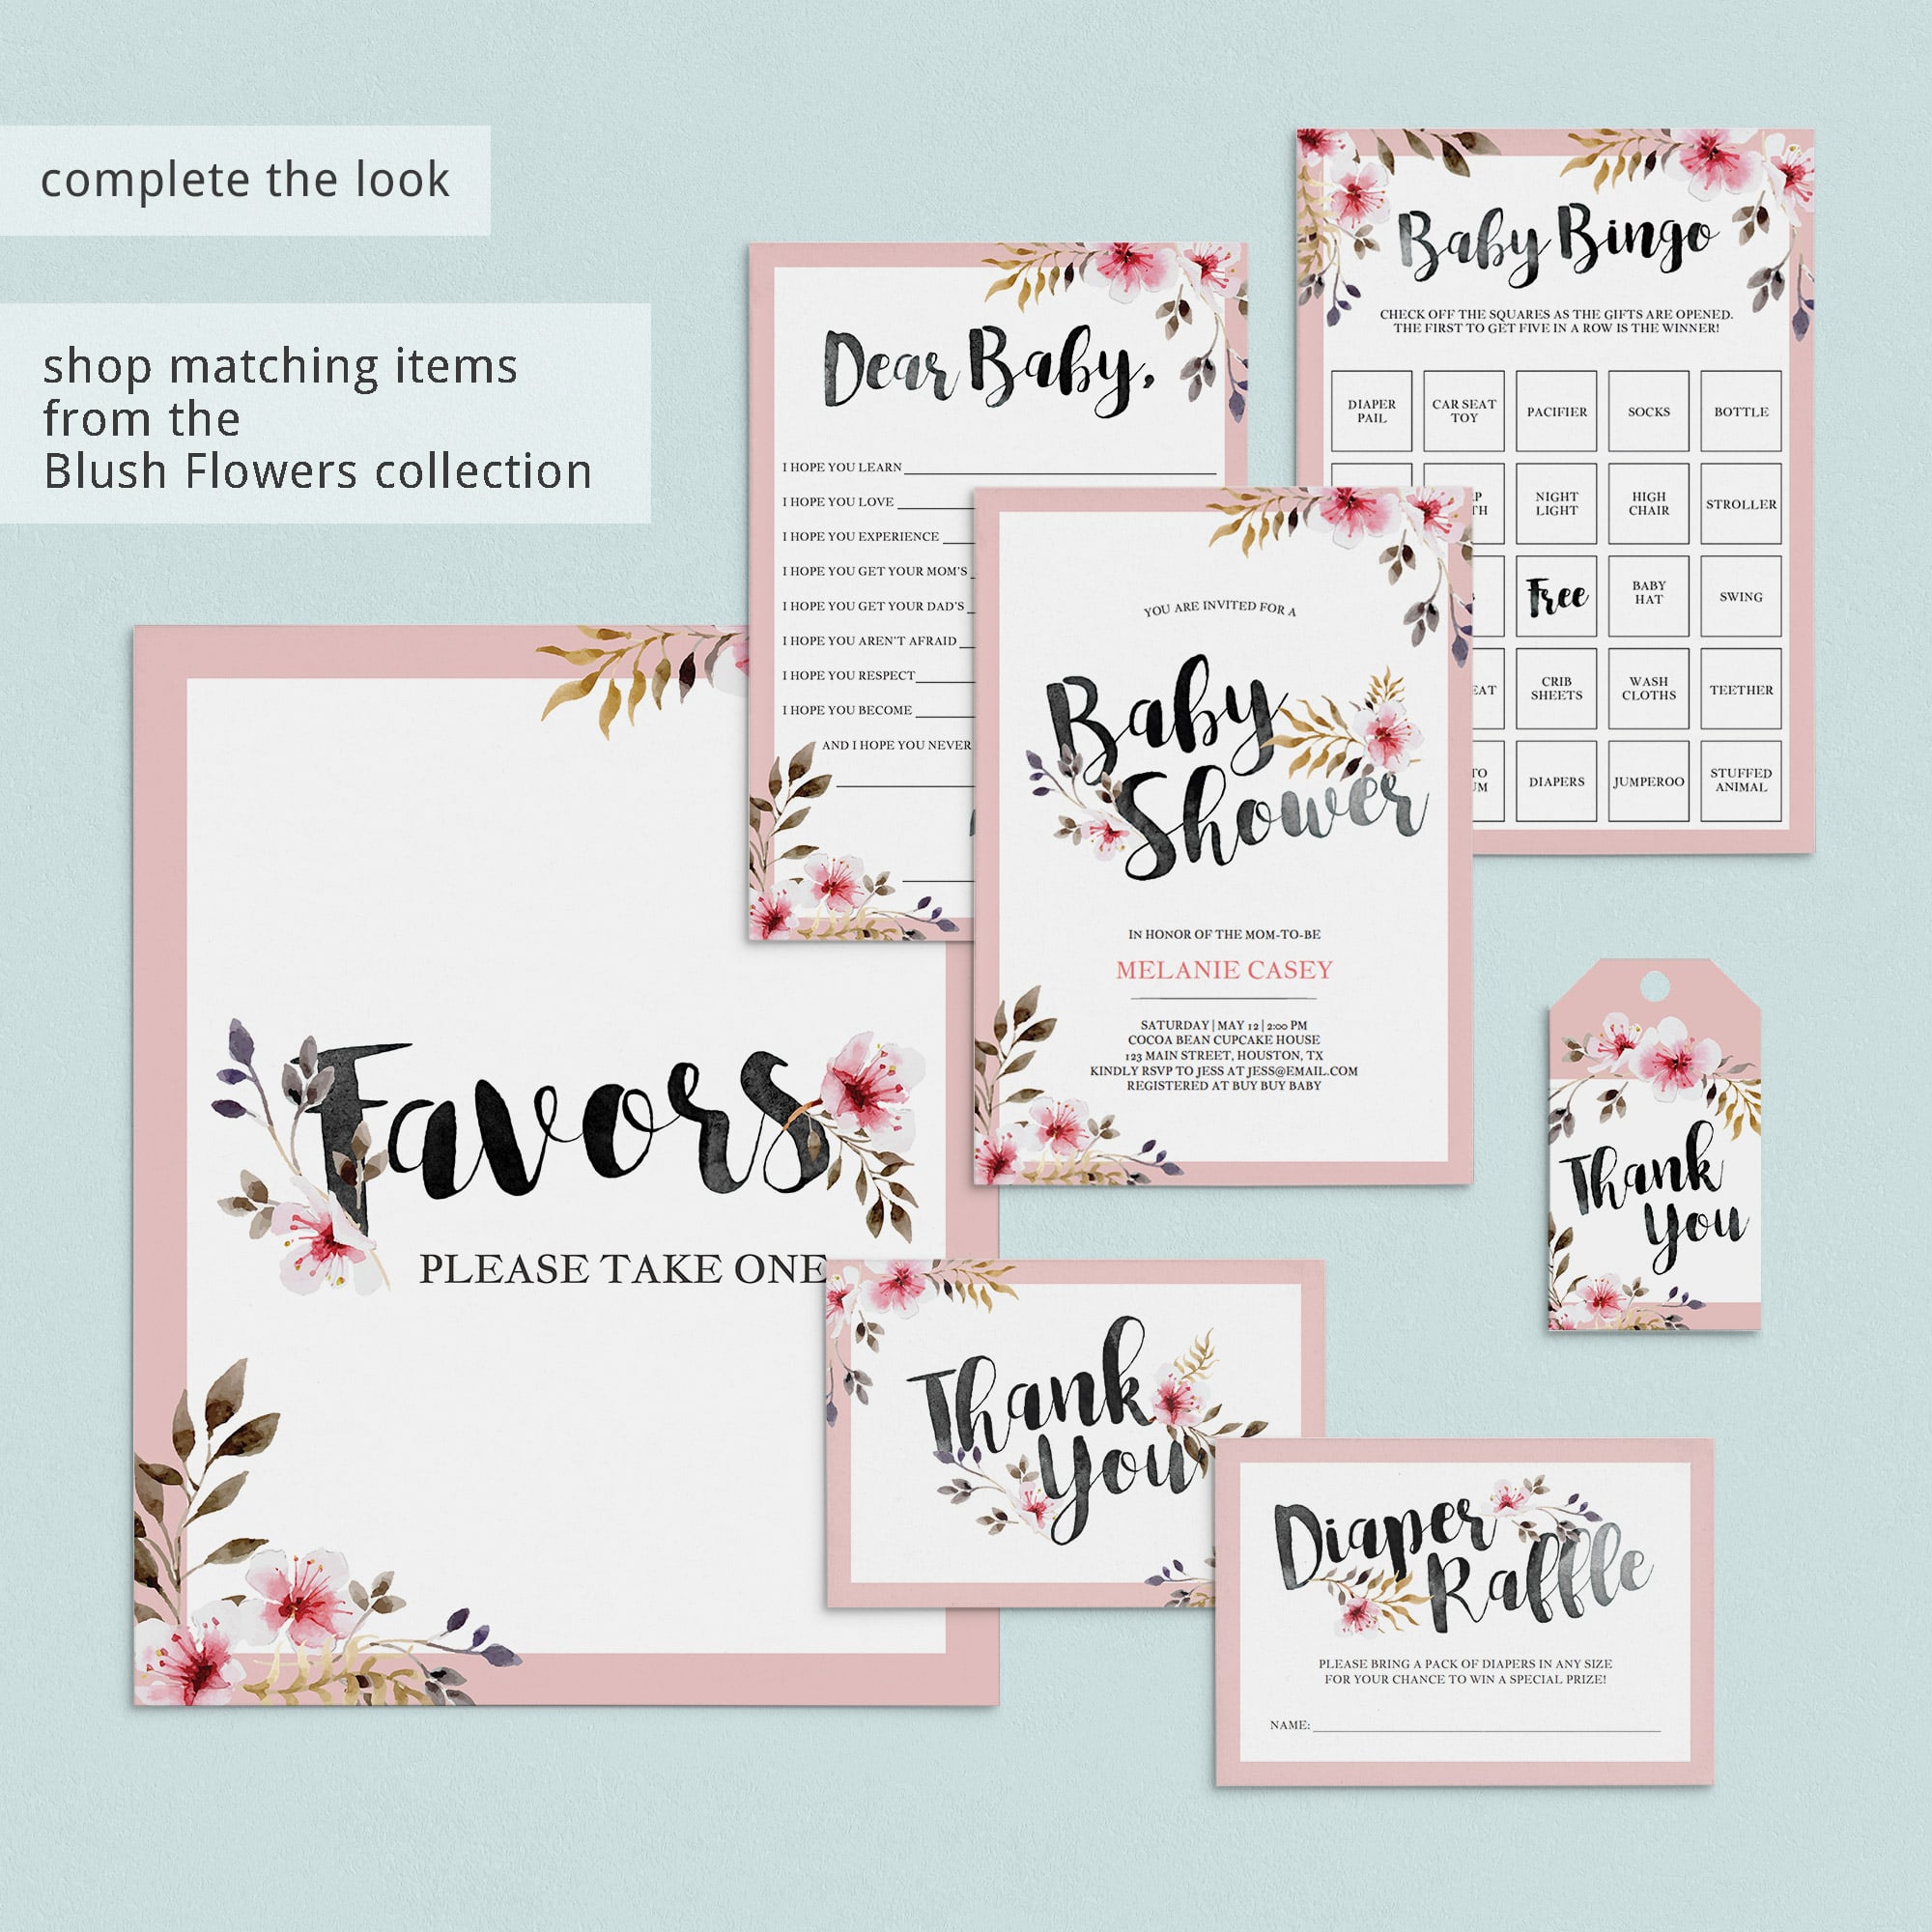 Floral watercolor games and decor for girl baby shower party by LittleSizzle